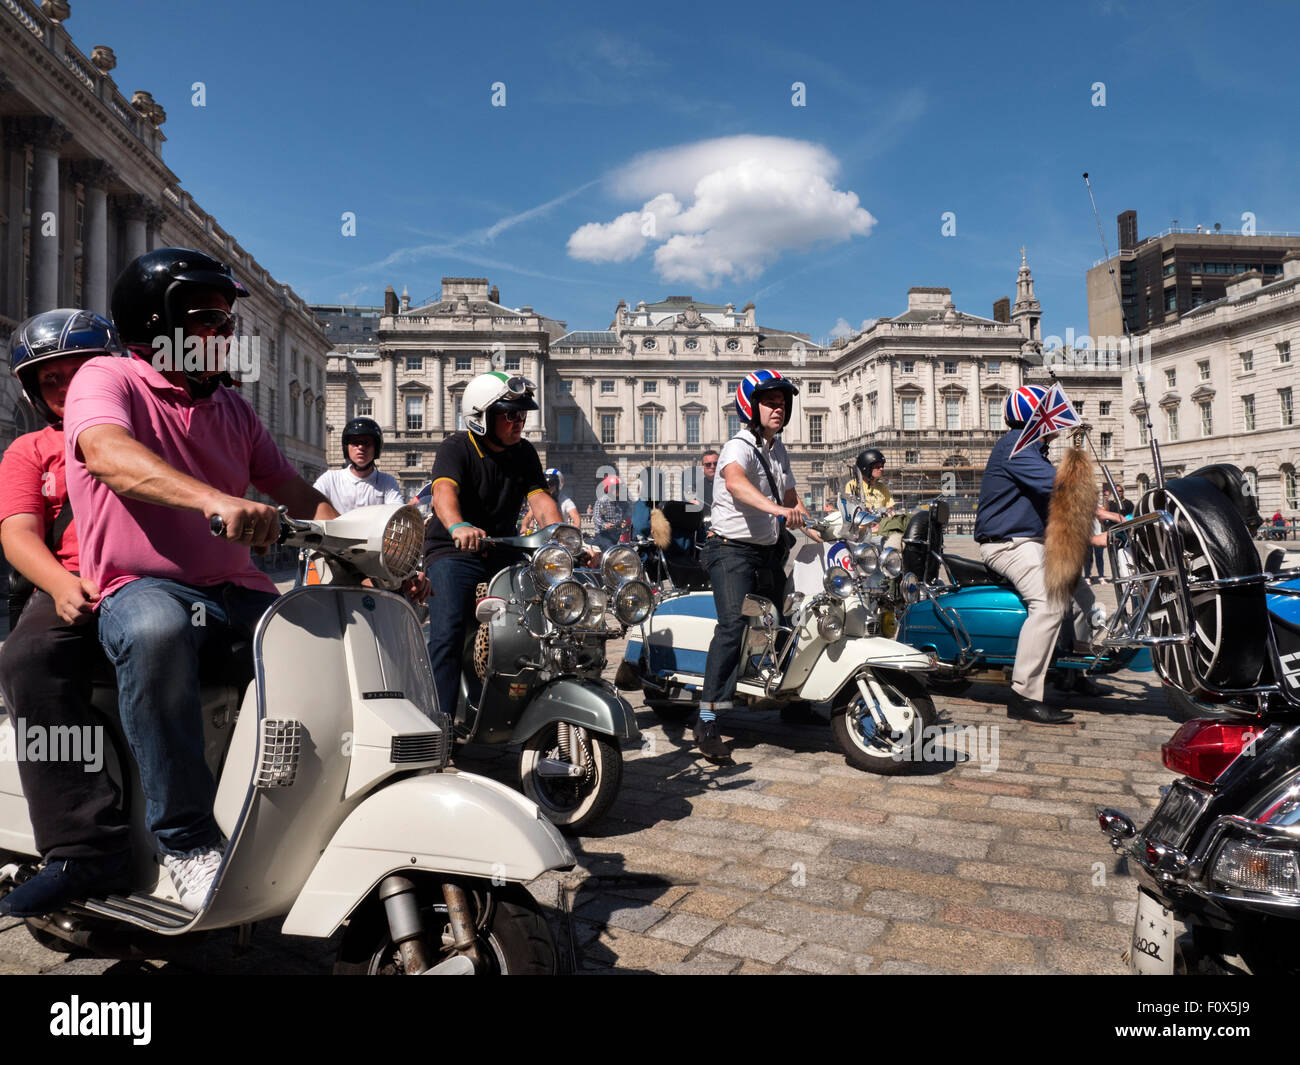 London, UK. 22nd August, 2015. Scooter posse visit to Somerset House at the Strand London to visit The Jam Exhinition 'About the Young Idea'. Credit:  Martyn Goddard/Alamy Live News Stock Photo